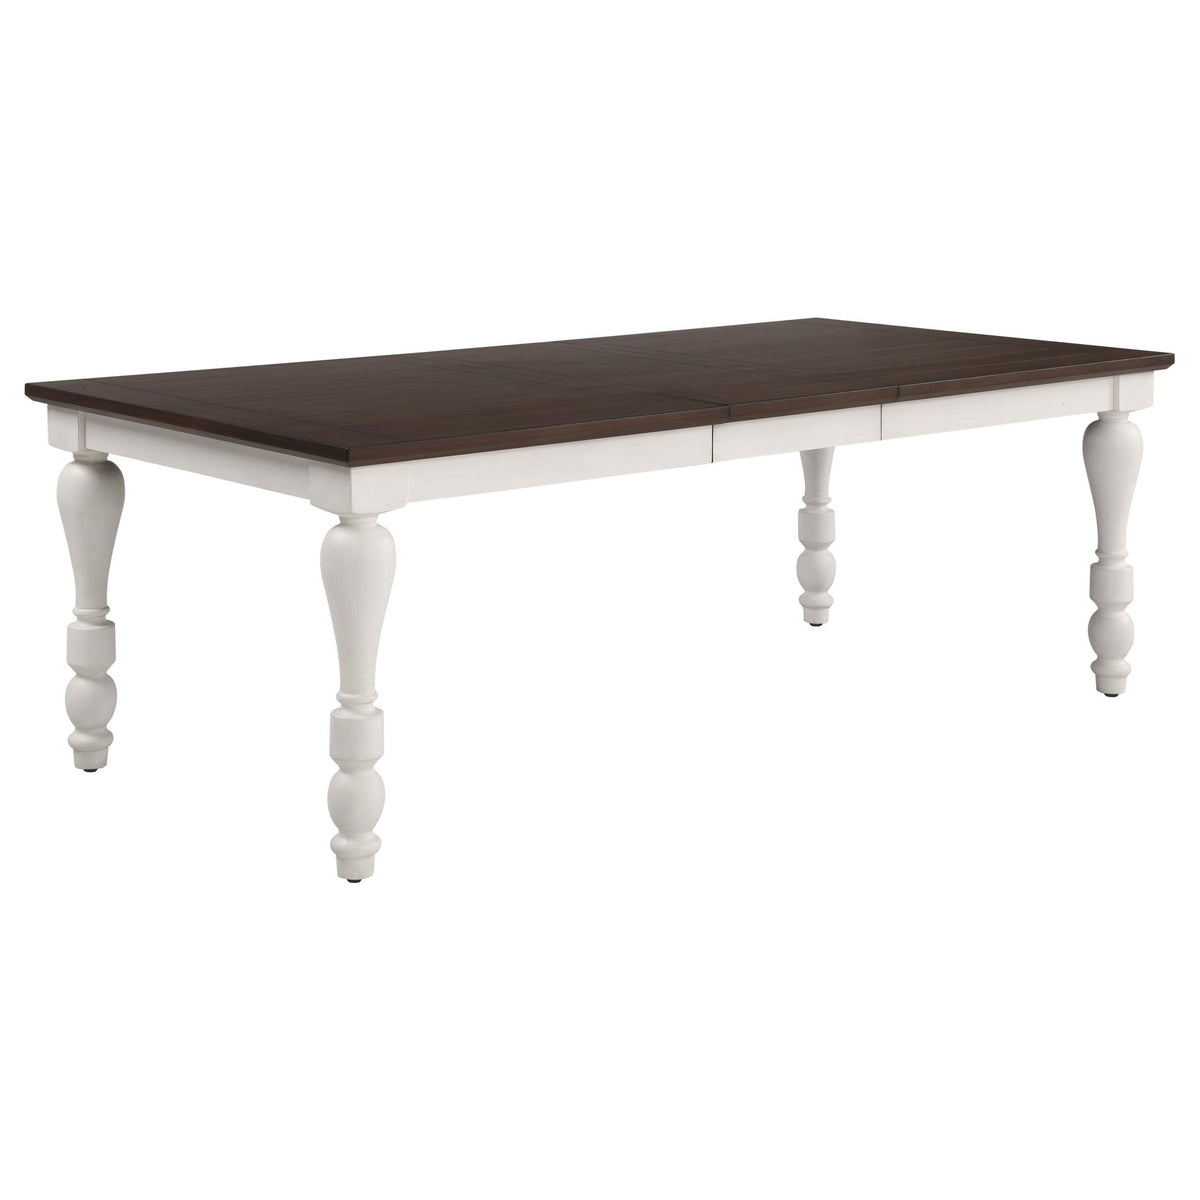 Madelyn Dining Table with Extension Leaf Dark Cocoa and Coastal White Madelyn Dining Table with Extension Leaf Dark Cocoa and Coastal White Half Price Furniture